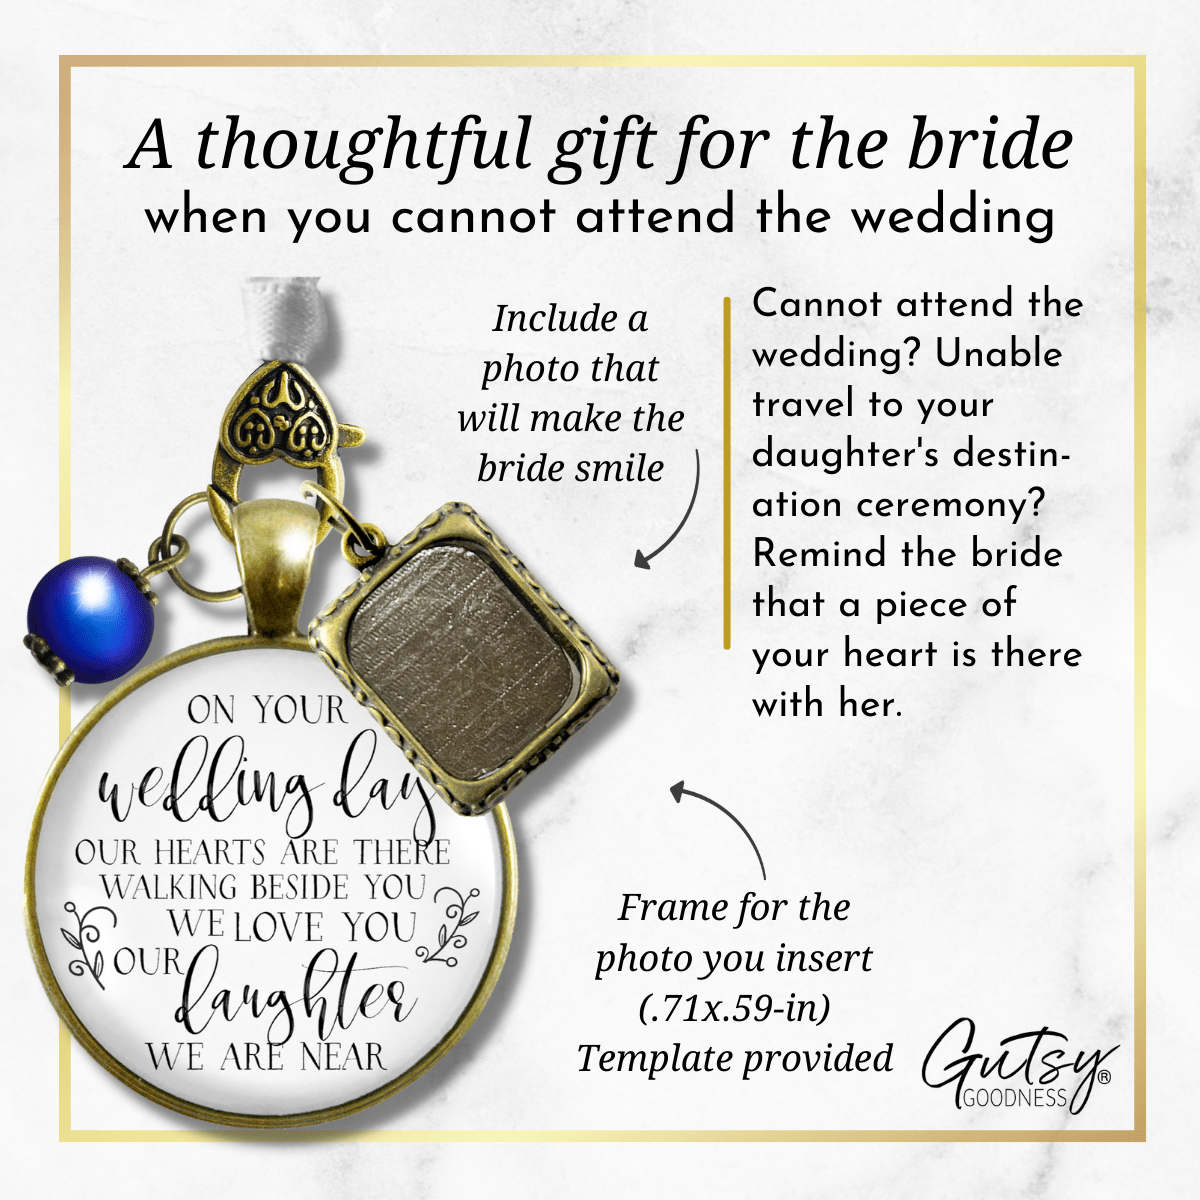 On Your Wedding Day OUR Heart Is There Walking Beside You DAUGHTER - DESTINATION BRONZE - WHITE - BLUE BEAD